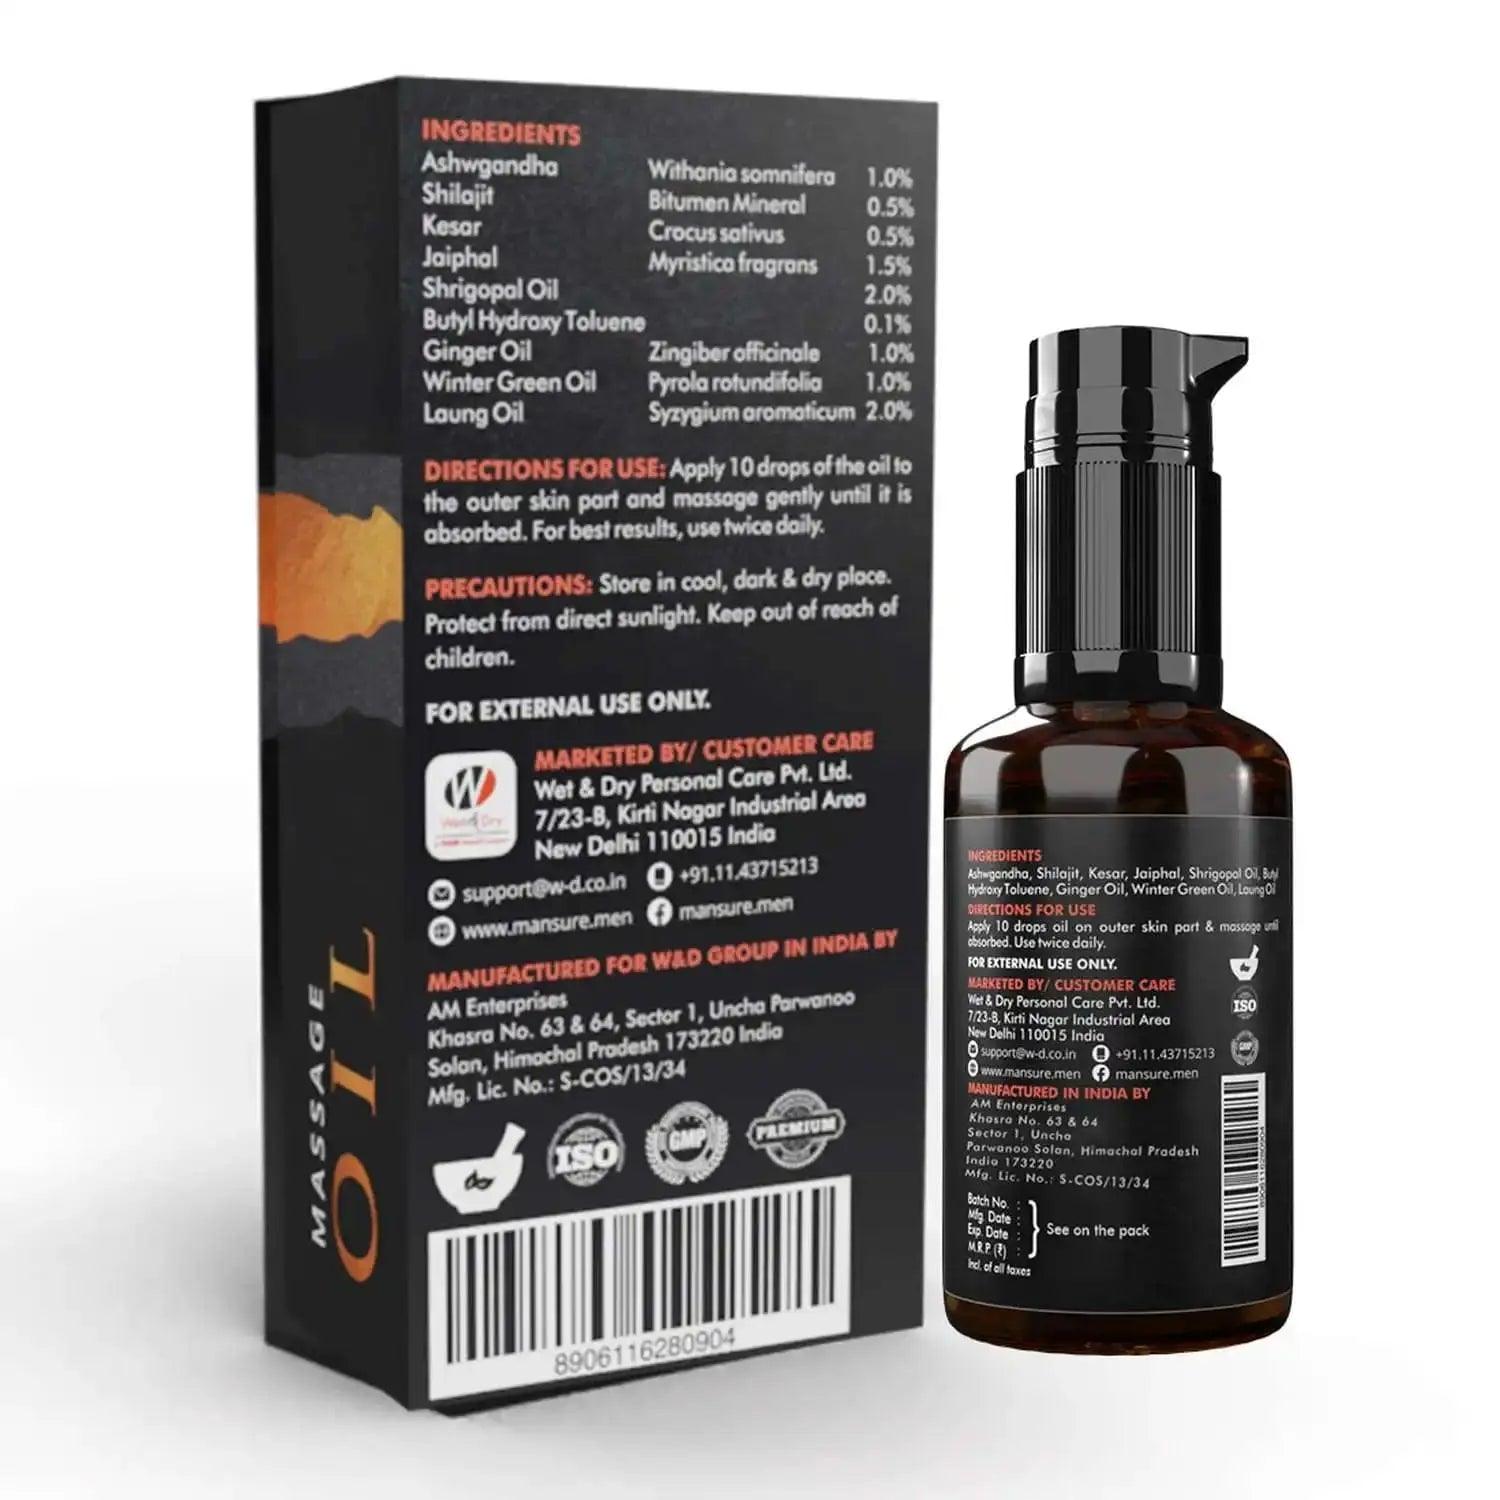 Store ManSure Massage Oil For Men's Health in a Cool, Dark and Dry Place.